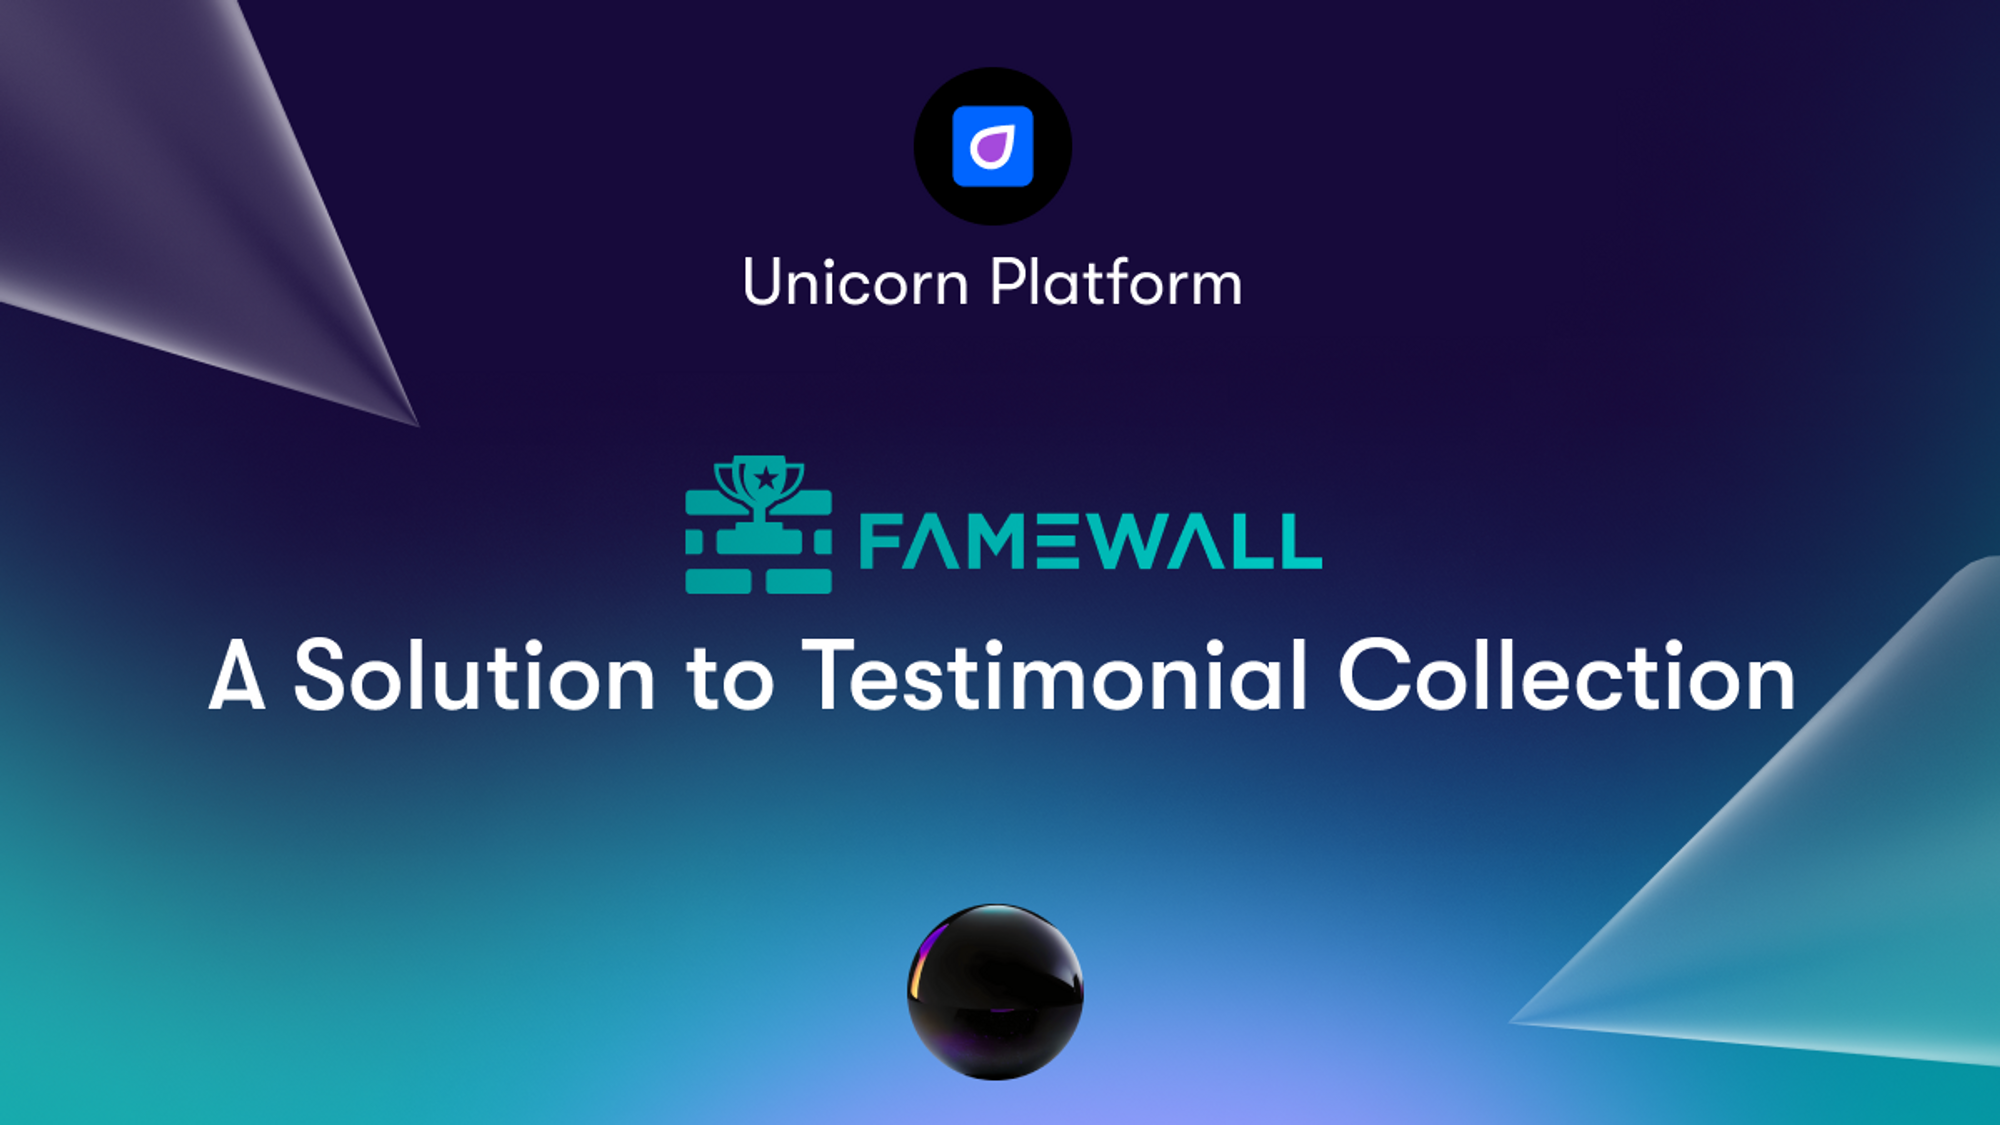 Famewall: A Solution to Testimonial Collection